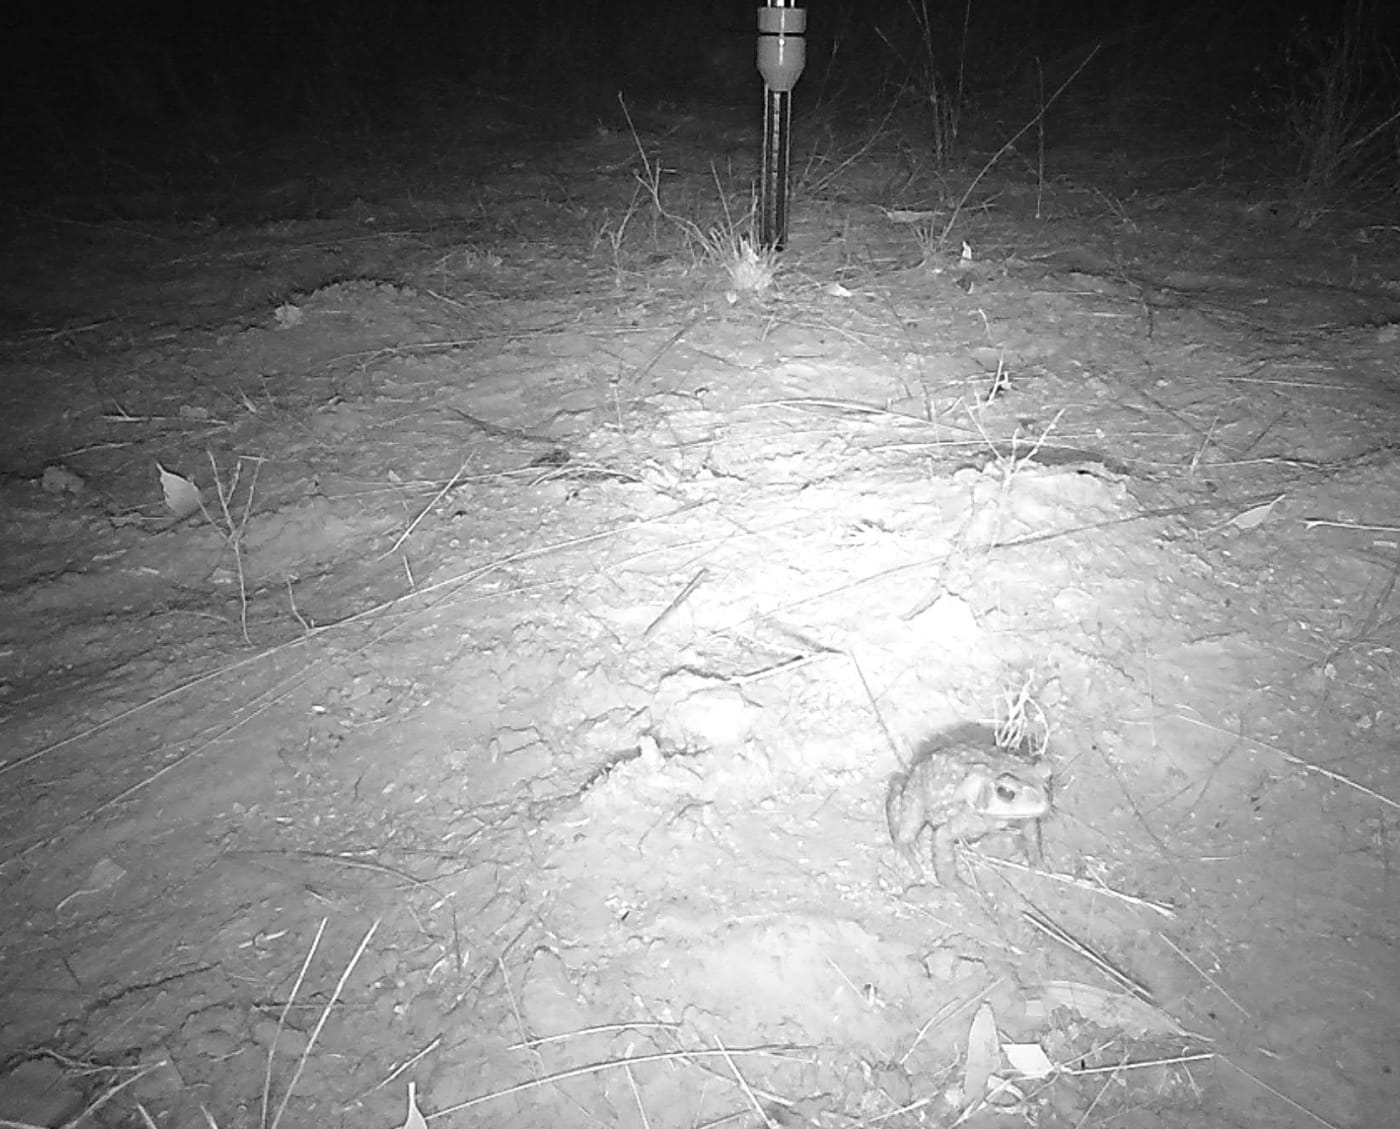 Cane toad on Kimberley camera trap